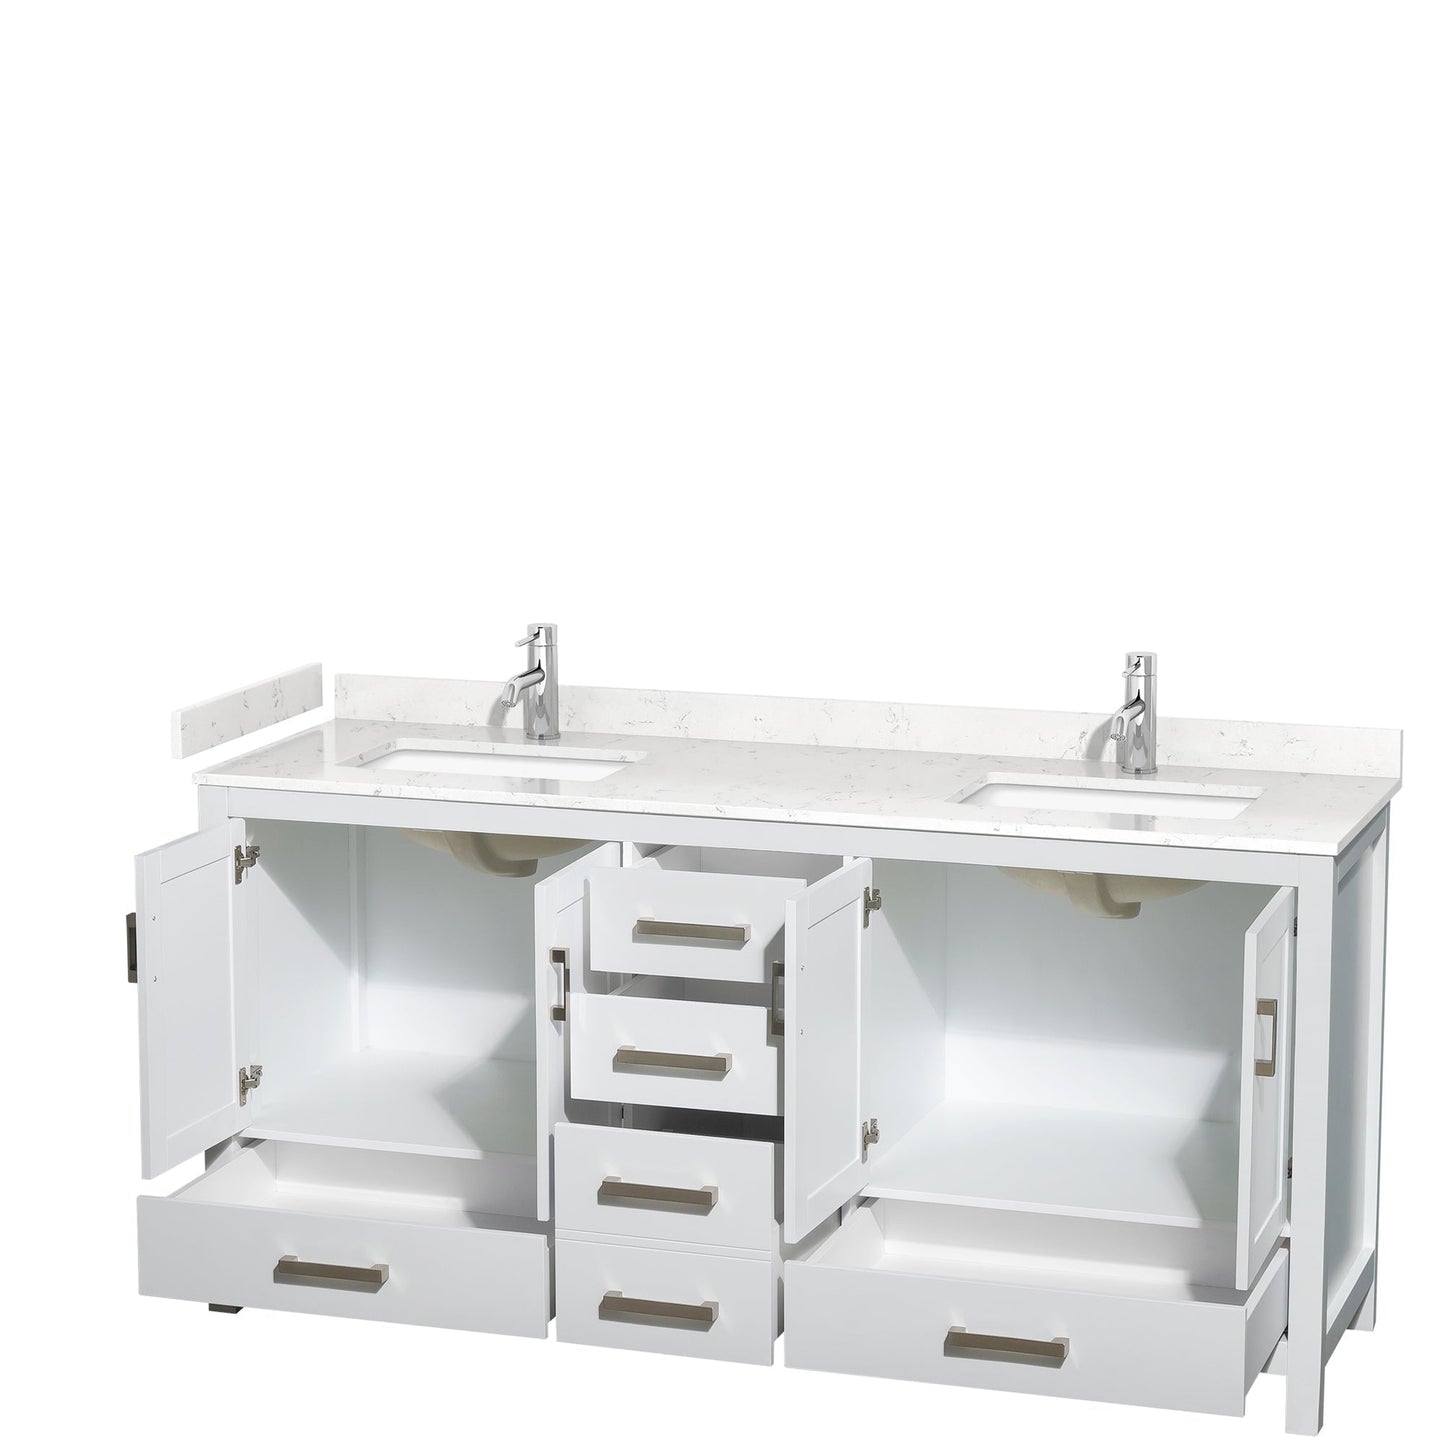 Wyndham Collection Sheffield 72" Double Bathroom Vanity in White, Carrara Cultured Marble Countertop, Undermount Square Sinks, No Mirror